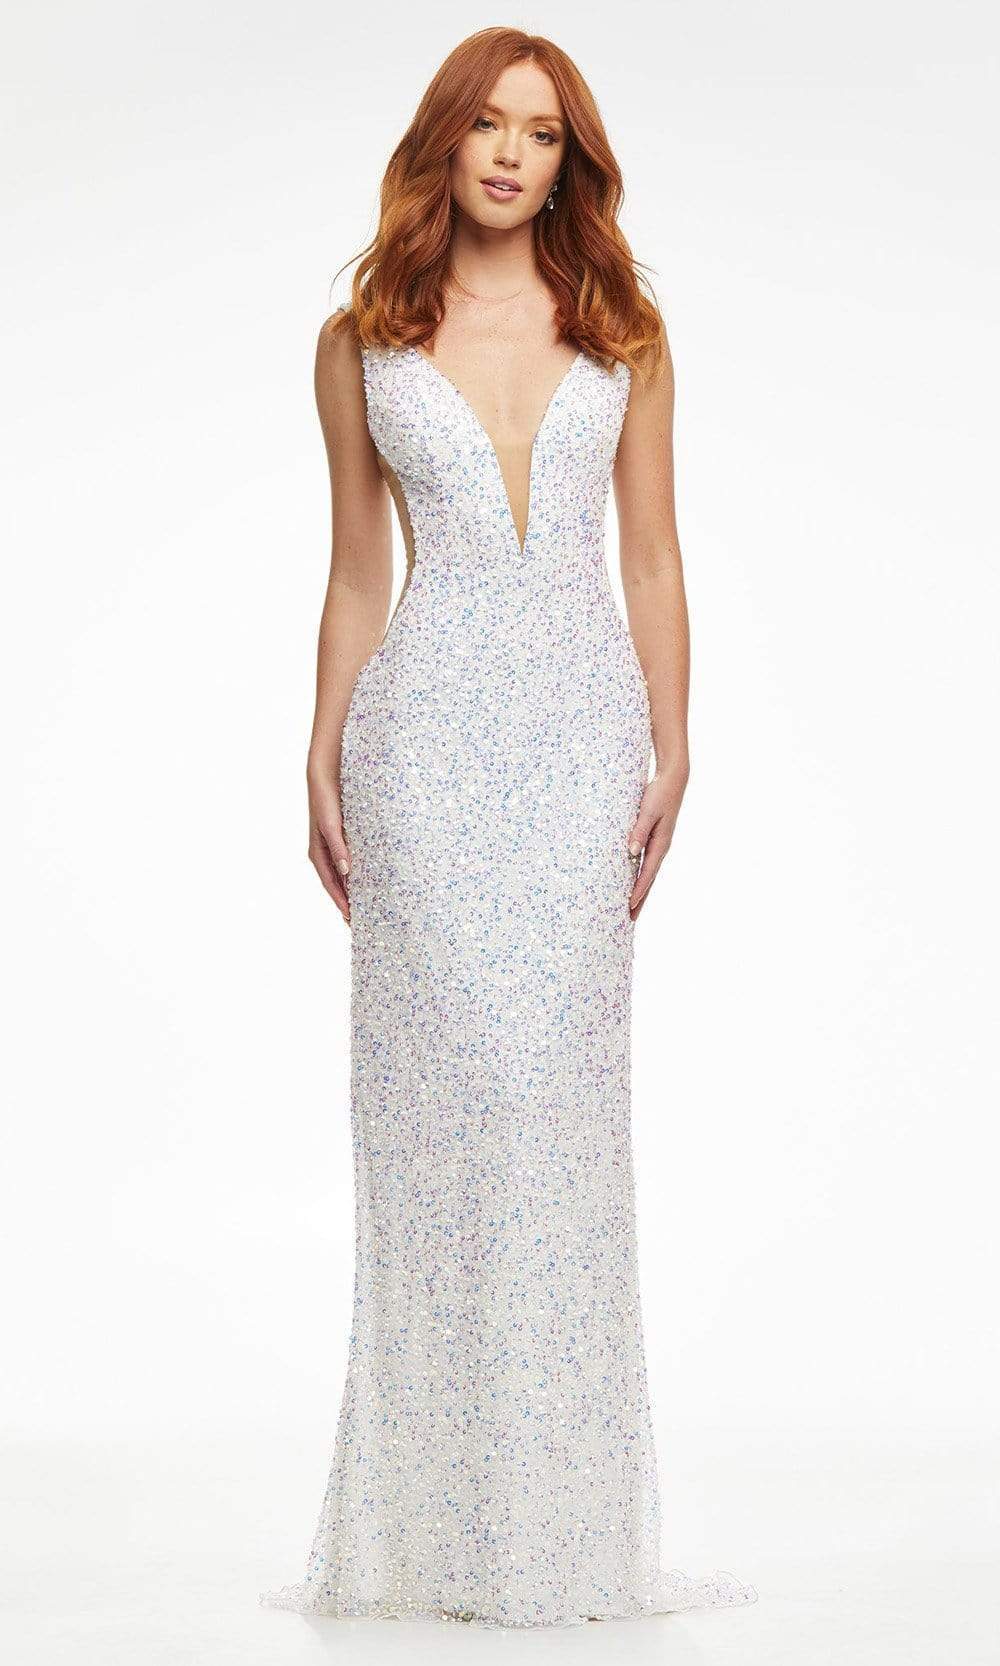 Image of Ashley Lauren - 11081 Fitted Sequin Evening Dress